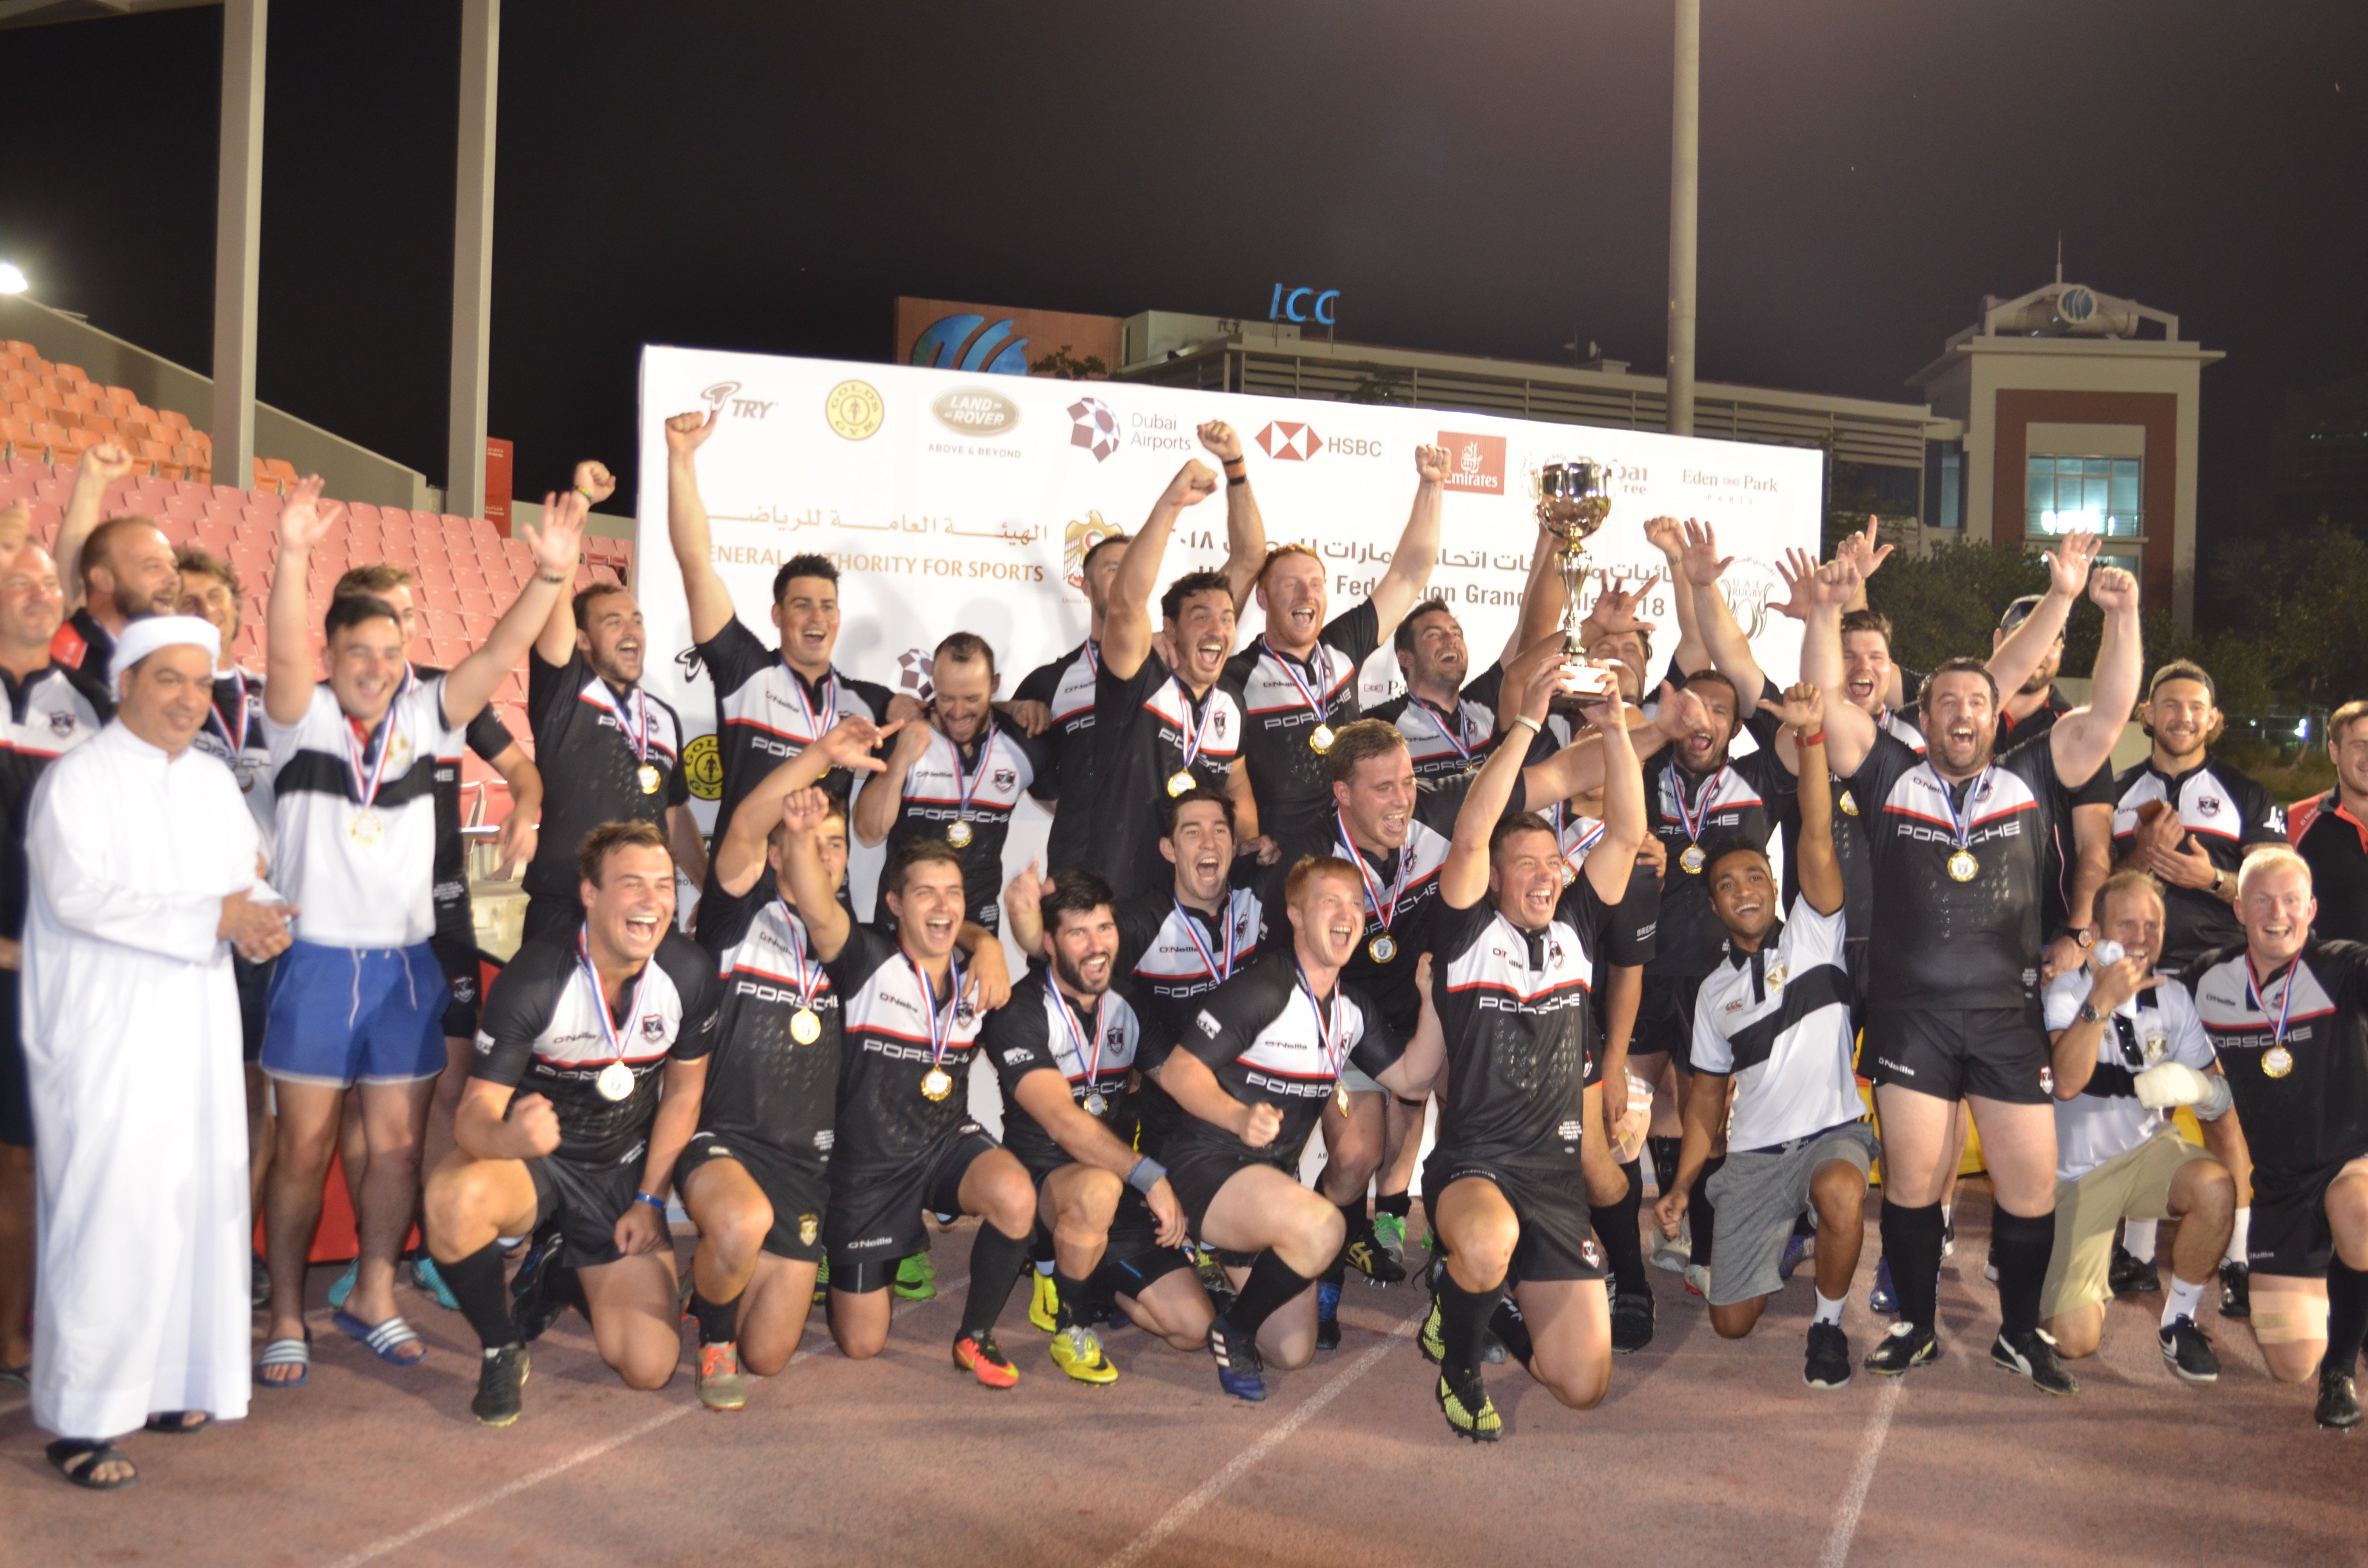 Registration open for Dubai Exiles Youth Rugby - Dubai Exiles Rugby Club